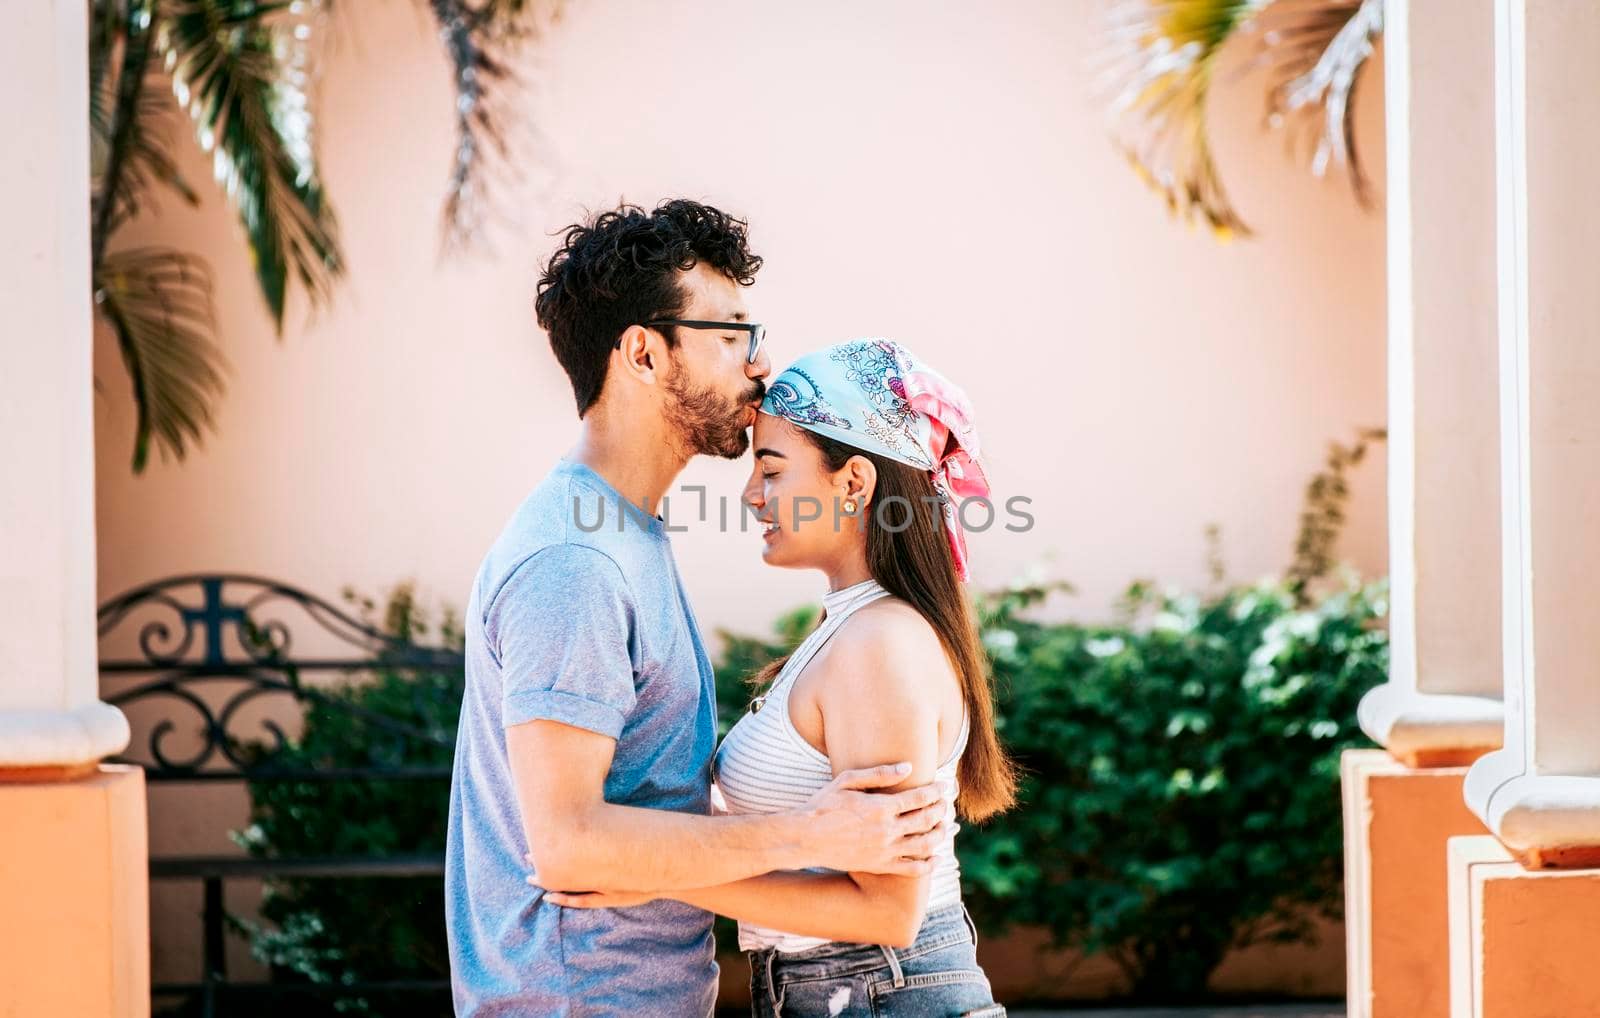 Man kissing his girlfriend forehead outside. Cute couple embracing the boyfriend kisses the girl forehead. Portrait of beautiful couple in love. Boyfriend tenderly kissing his girlfriend forehead by isaiphoto